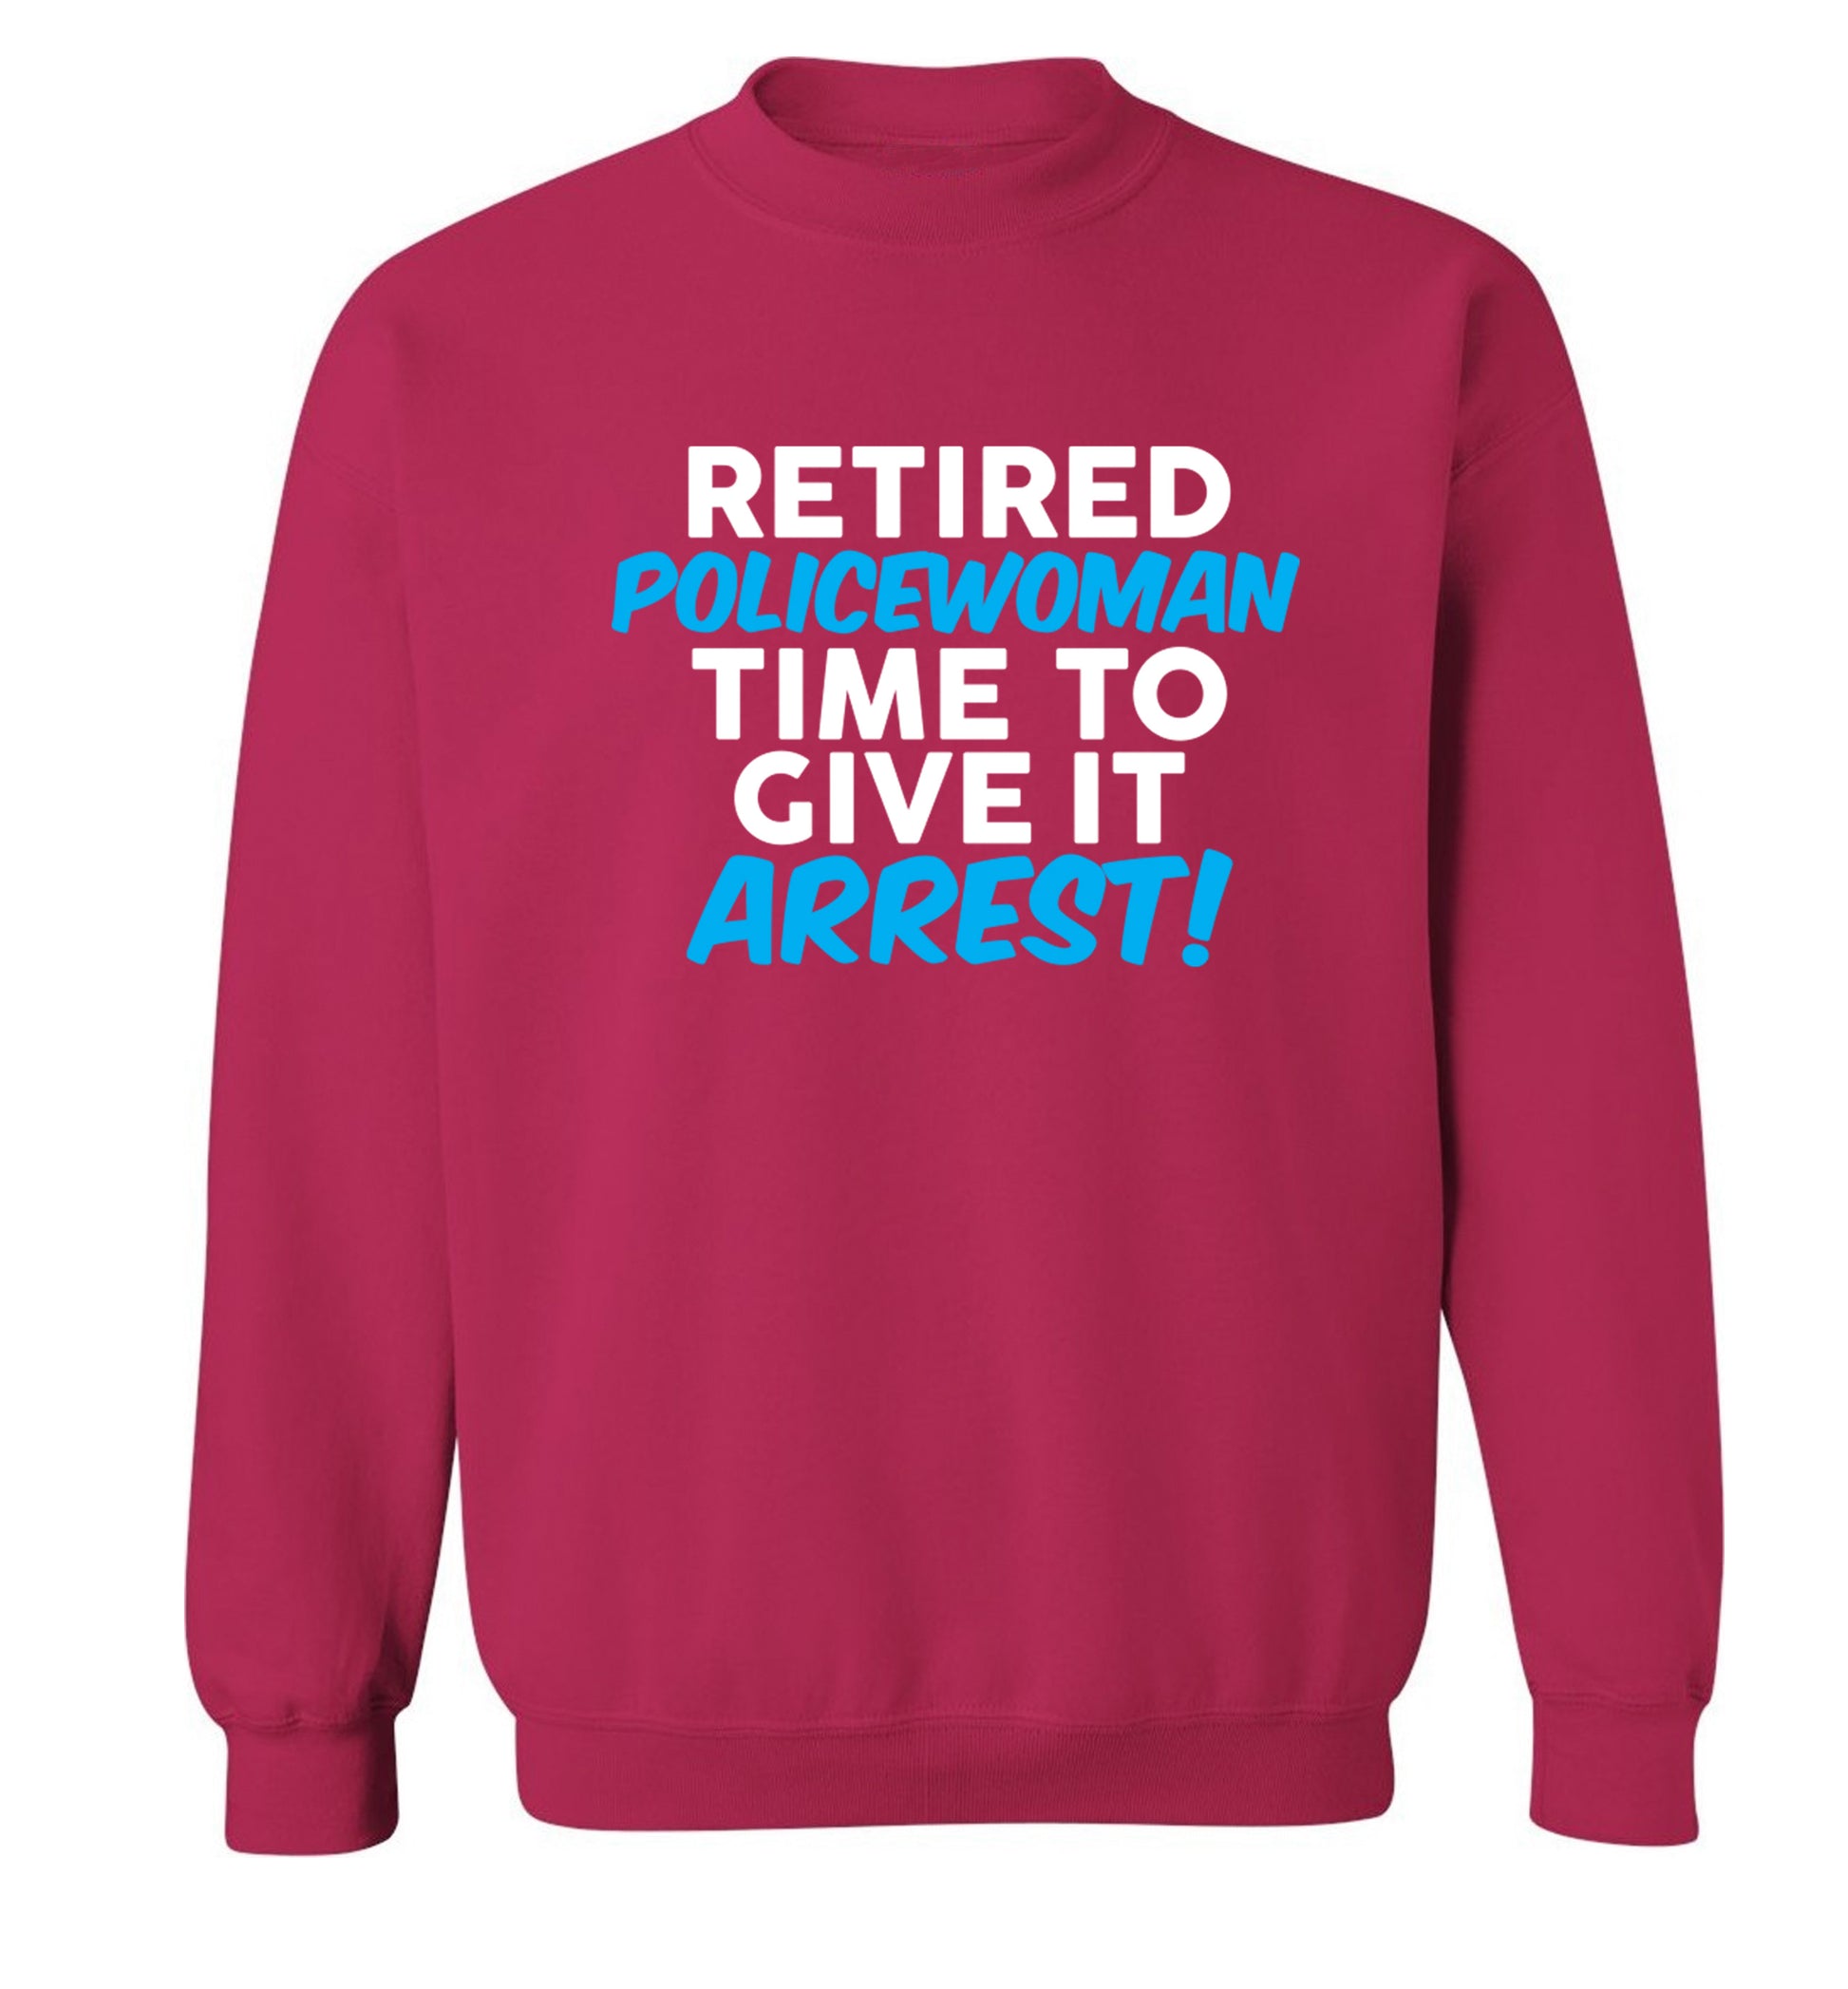 Retired policewoman time to give it arrest Adult's unisex pink Sweater 2XL